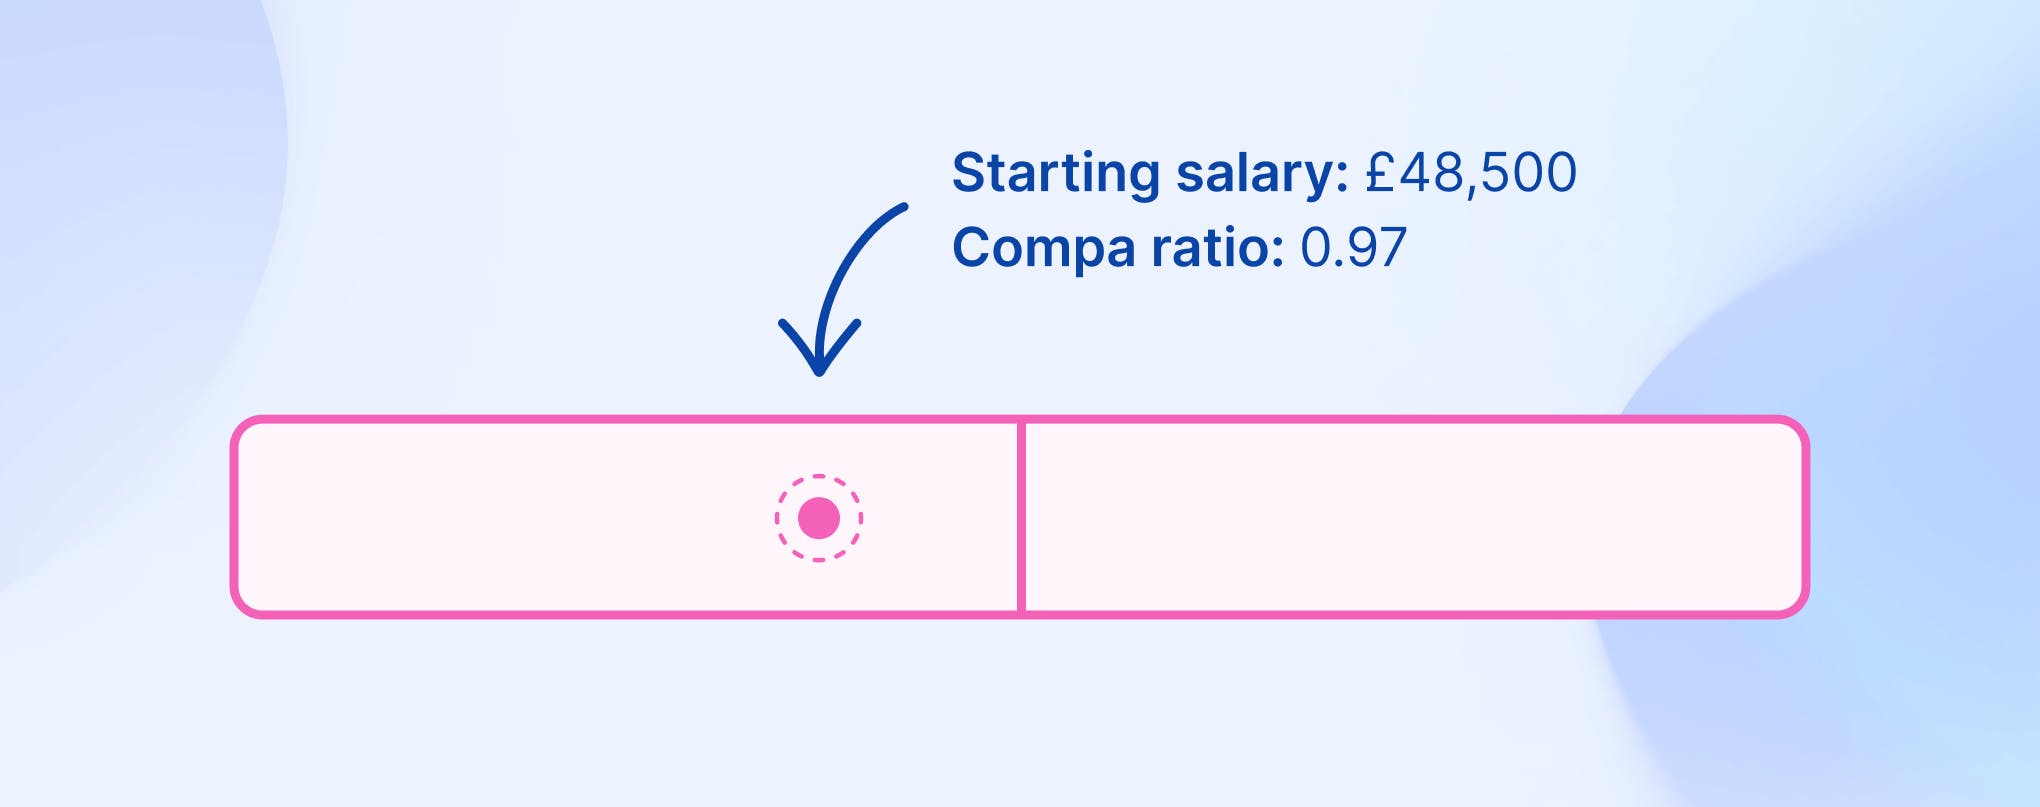 A salary band showing the starting salary of an employee as £48,500 – a compa ratio of 0.97.